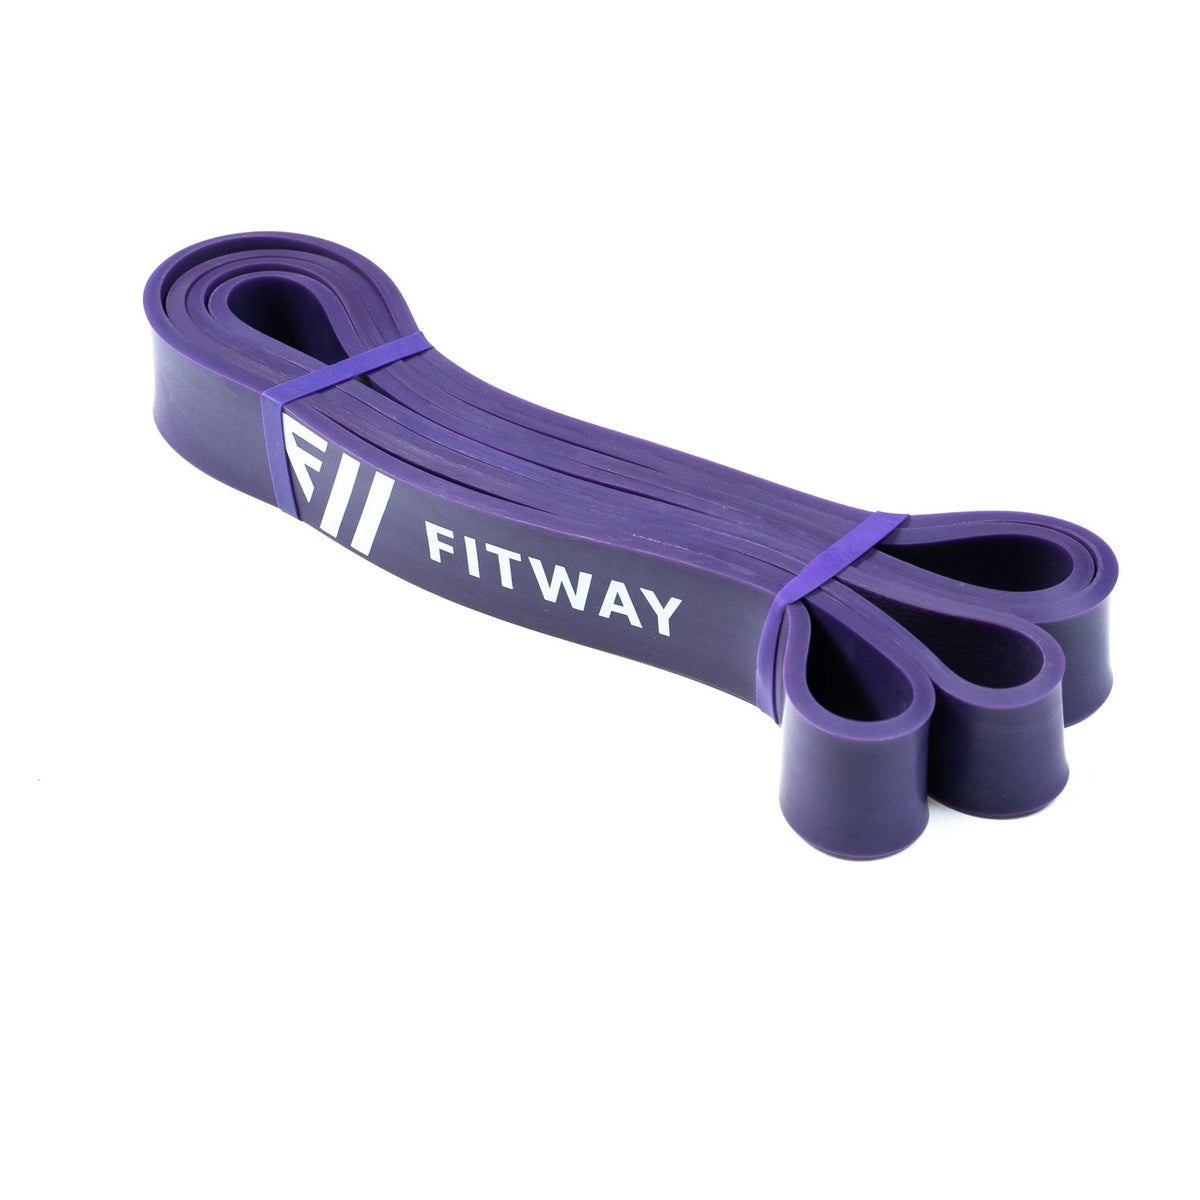 FitWay Equip. FitWay Power Bands - Fitness Experience